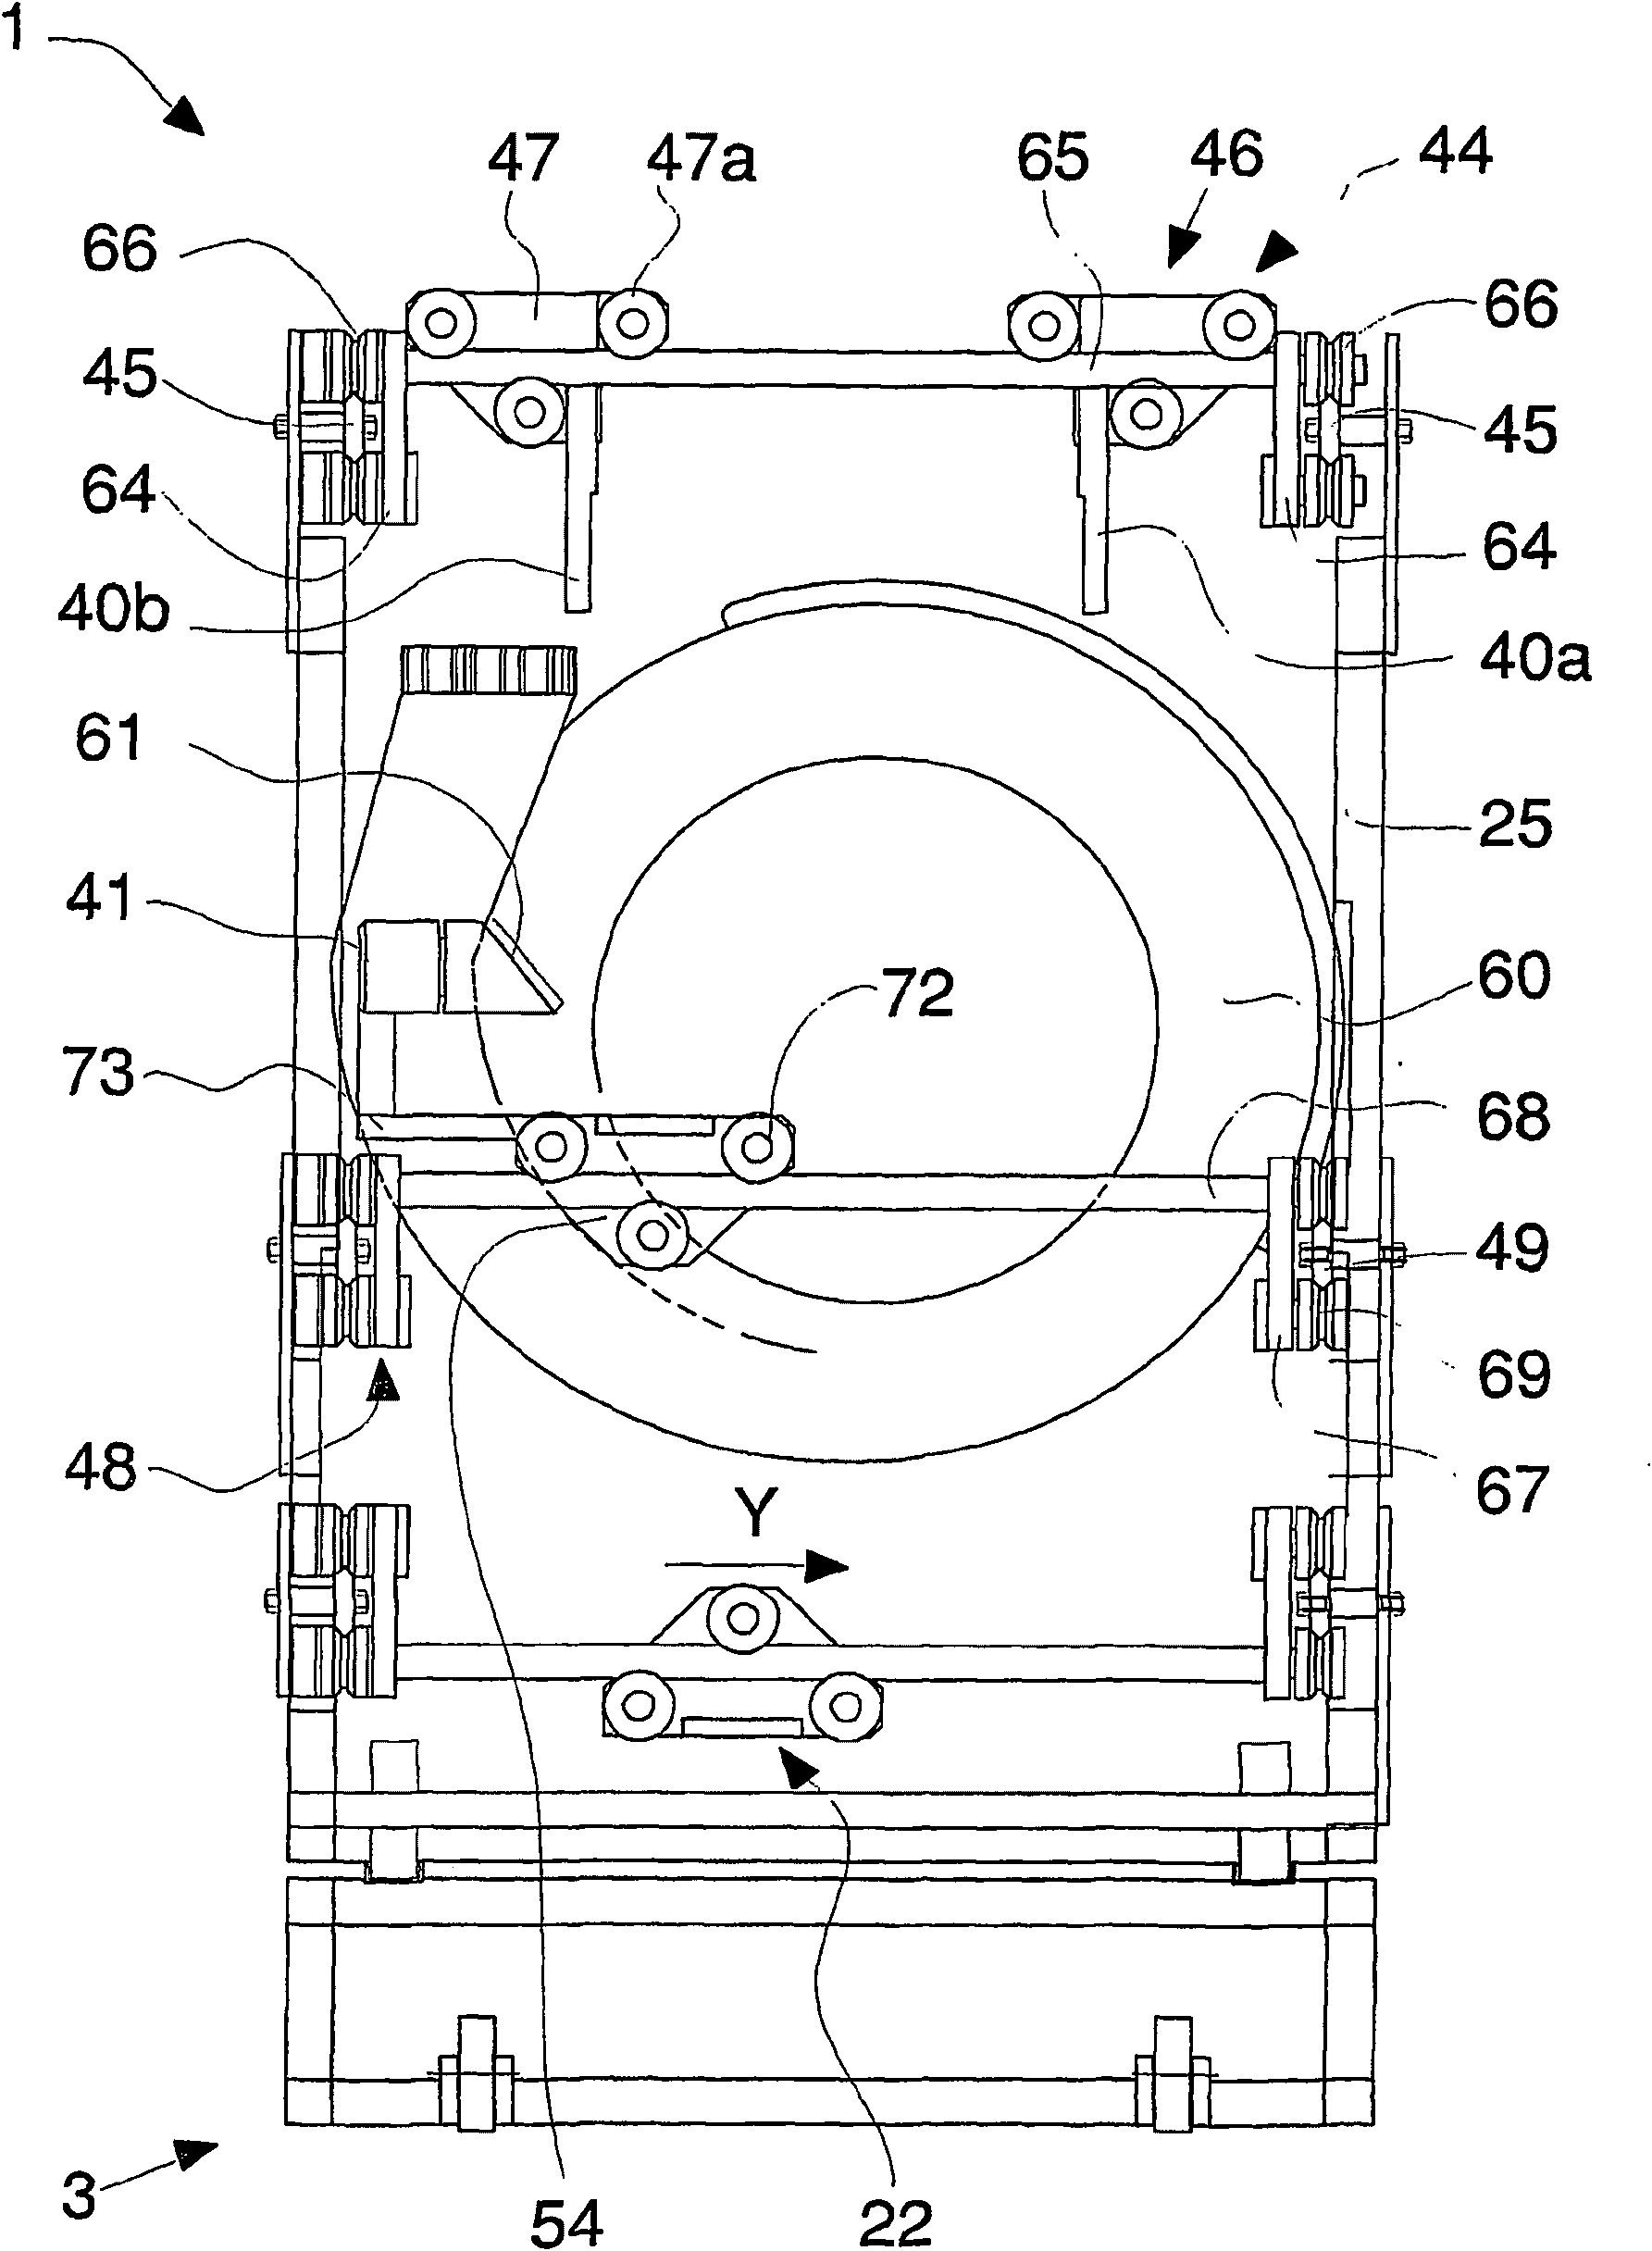 Apparatus for transferring and moving elements of a working machine